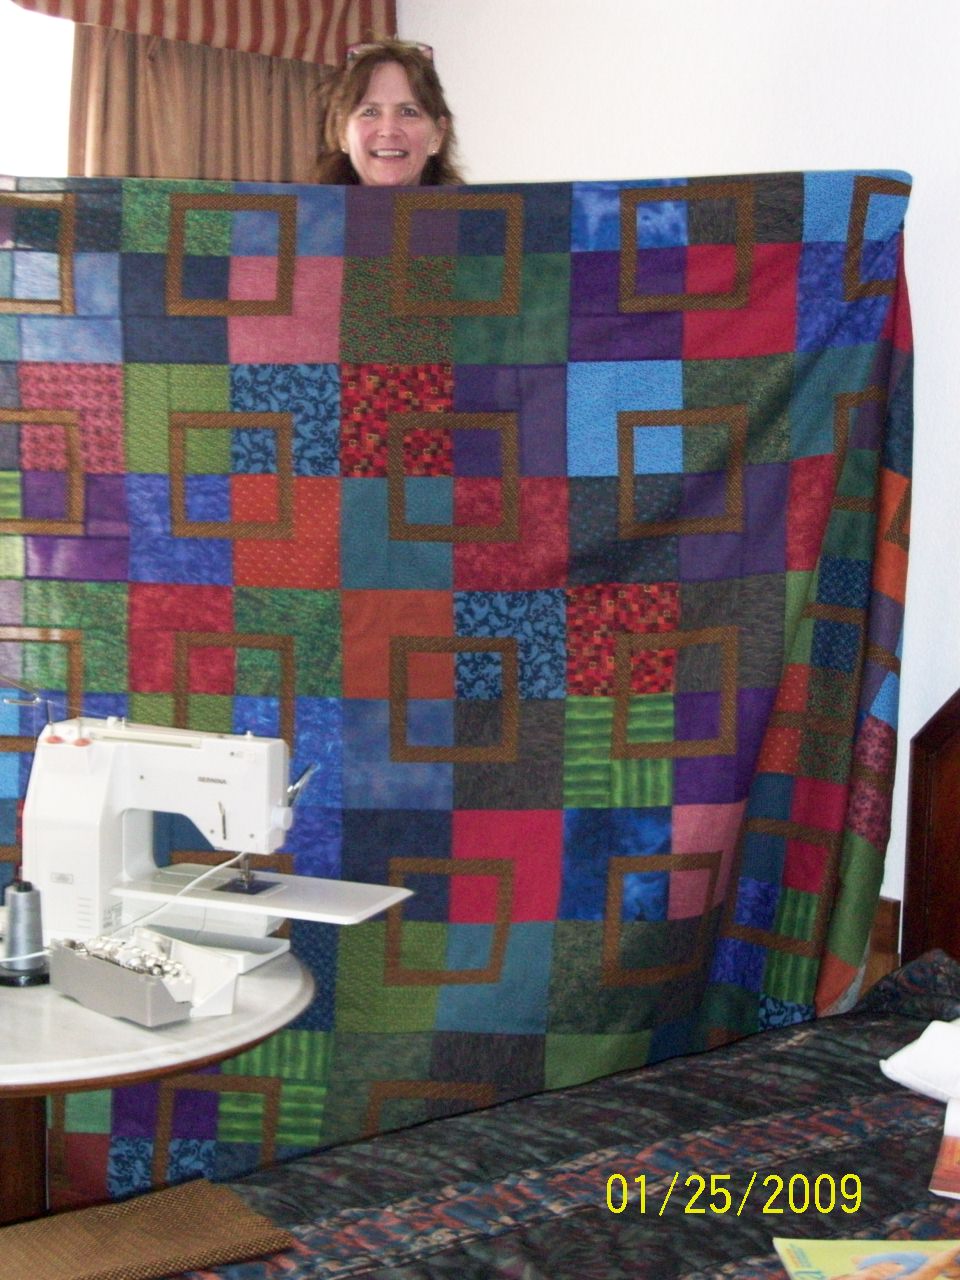 My sister, Laurel with the quilt we pieced for her son, Joe.